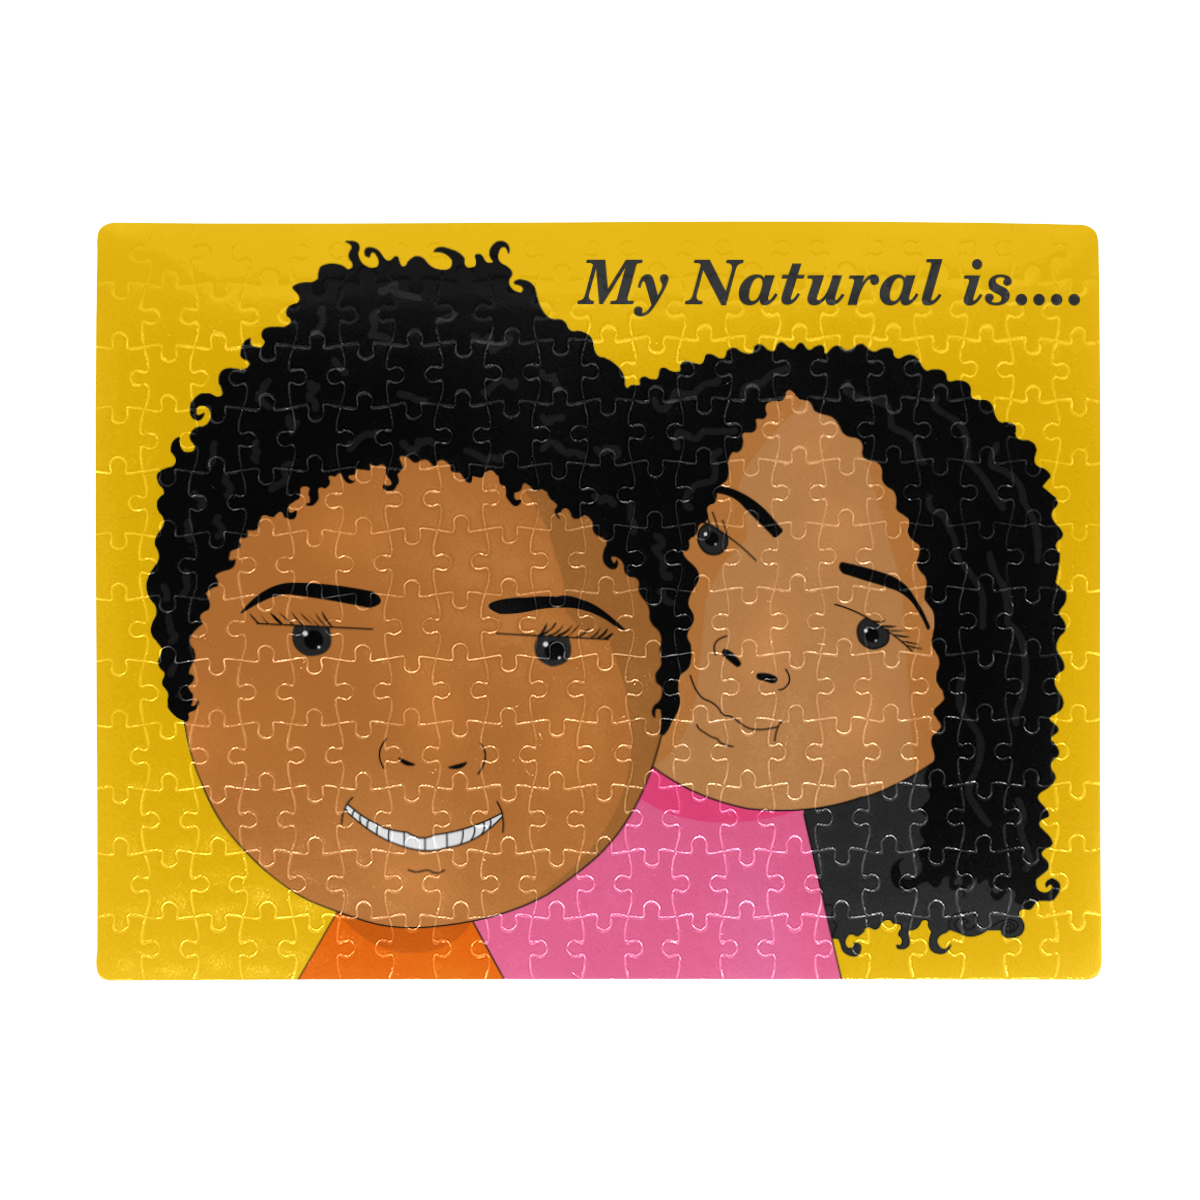 MyNaturalis_Puzzle Yellow A3 Size Jigsaw Puzzle (Set of 252 Pieces)